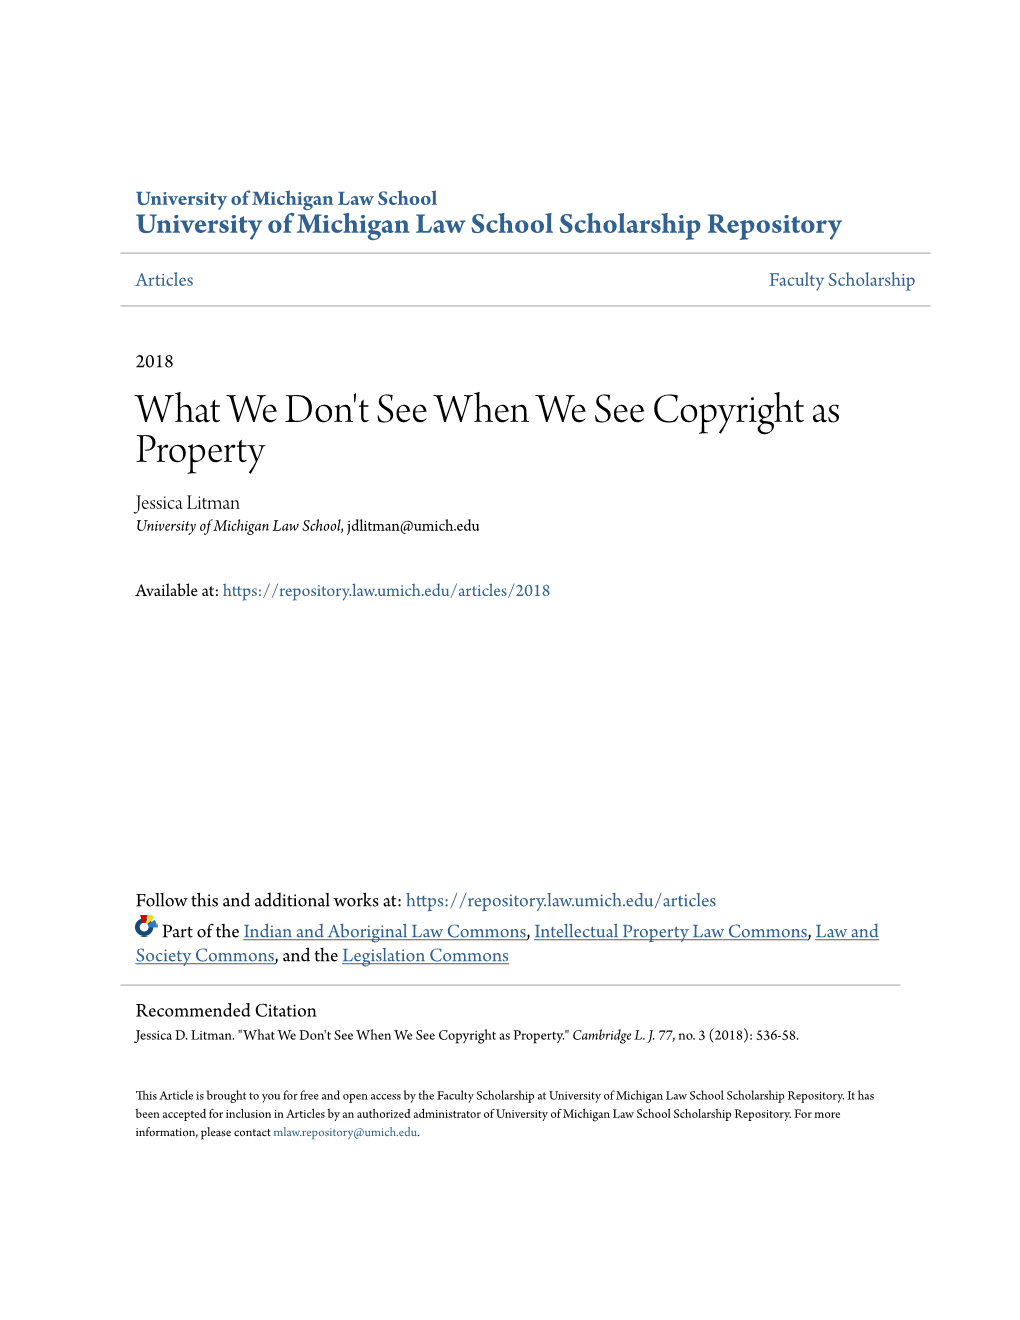 What We Don't See When We See Copyright As Property Jessica Litman University of Michigan Law School, Jdlitman@Umich.Edu